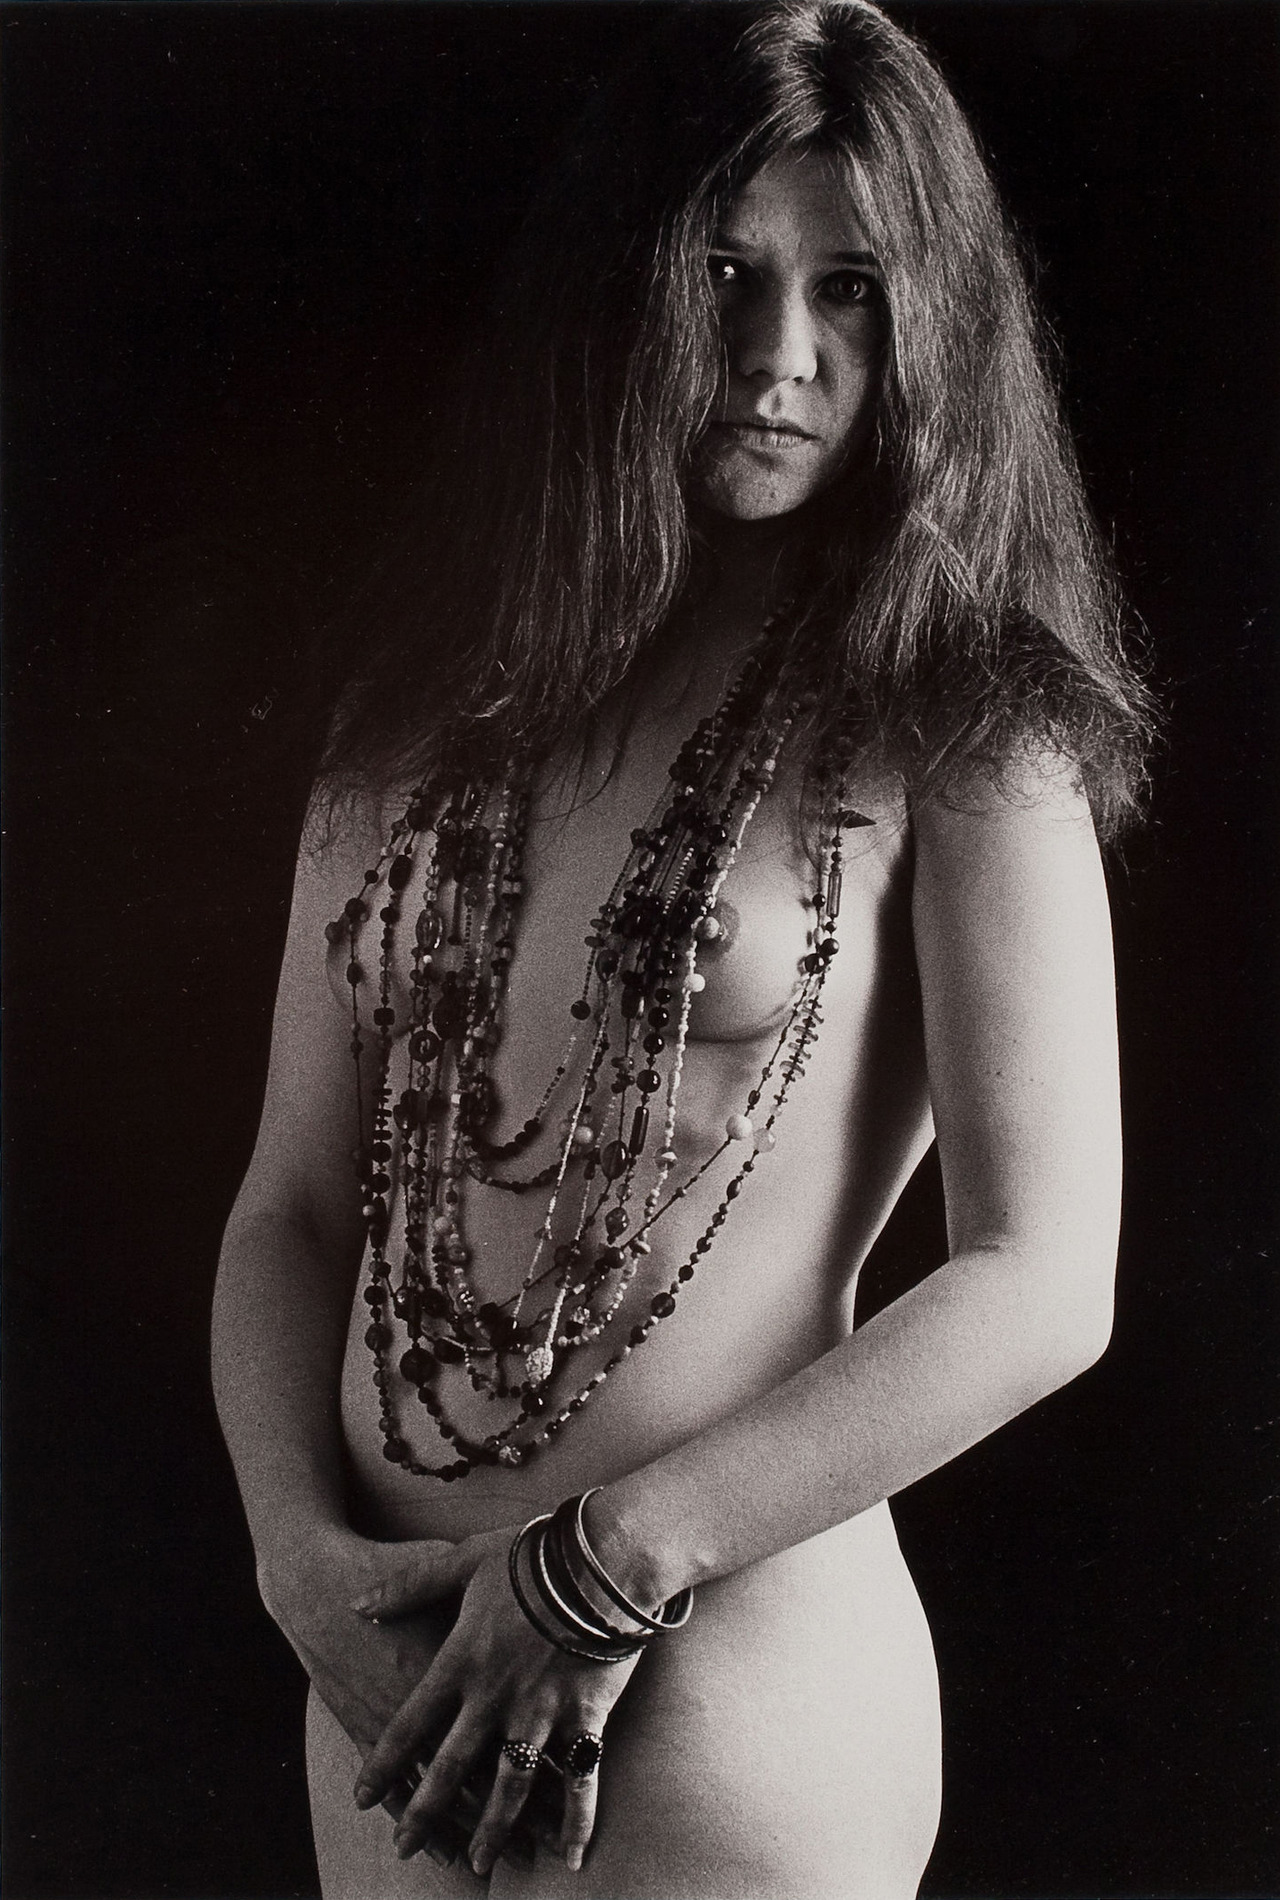 andrew baillargeon recommends janis joplin nude pics pic